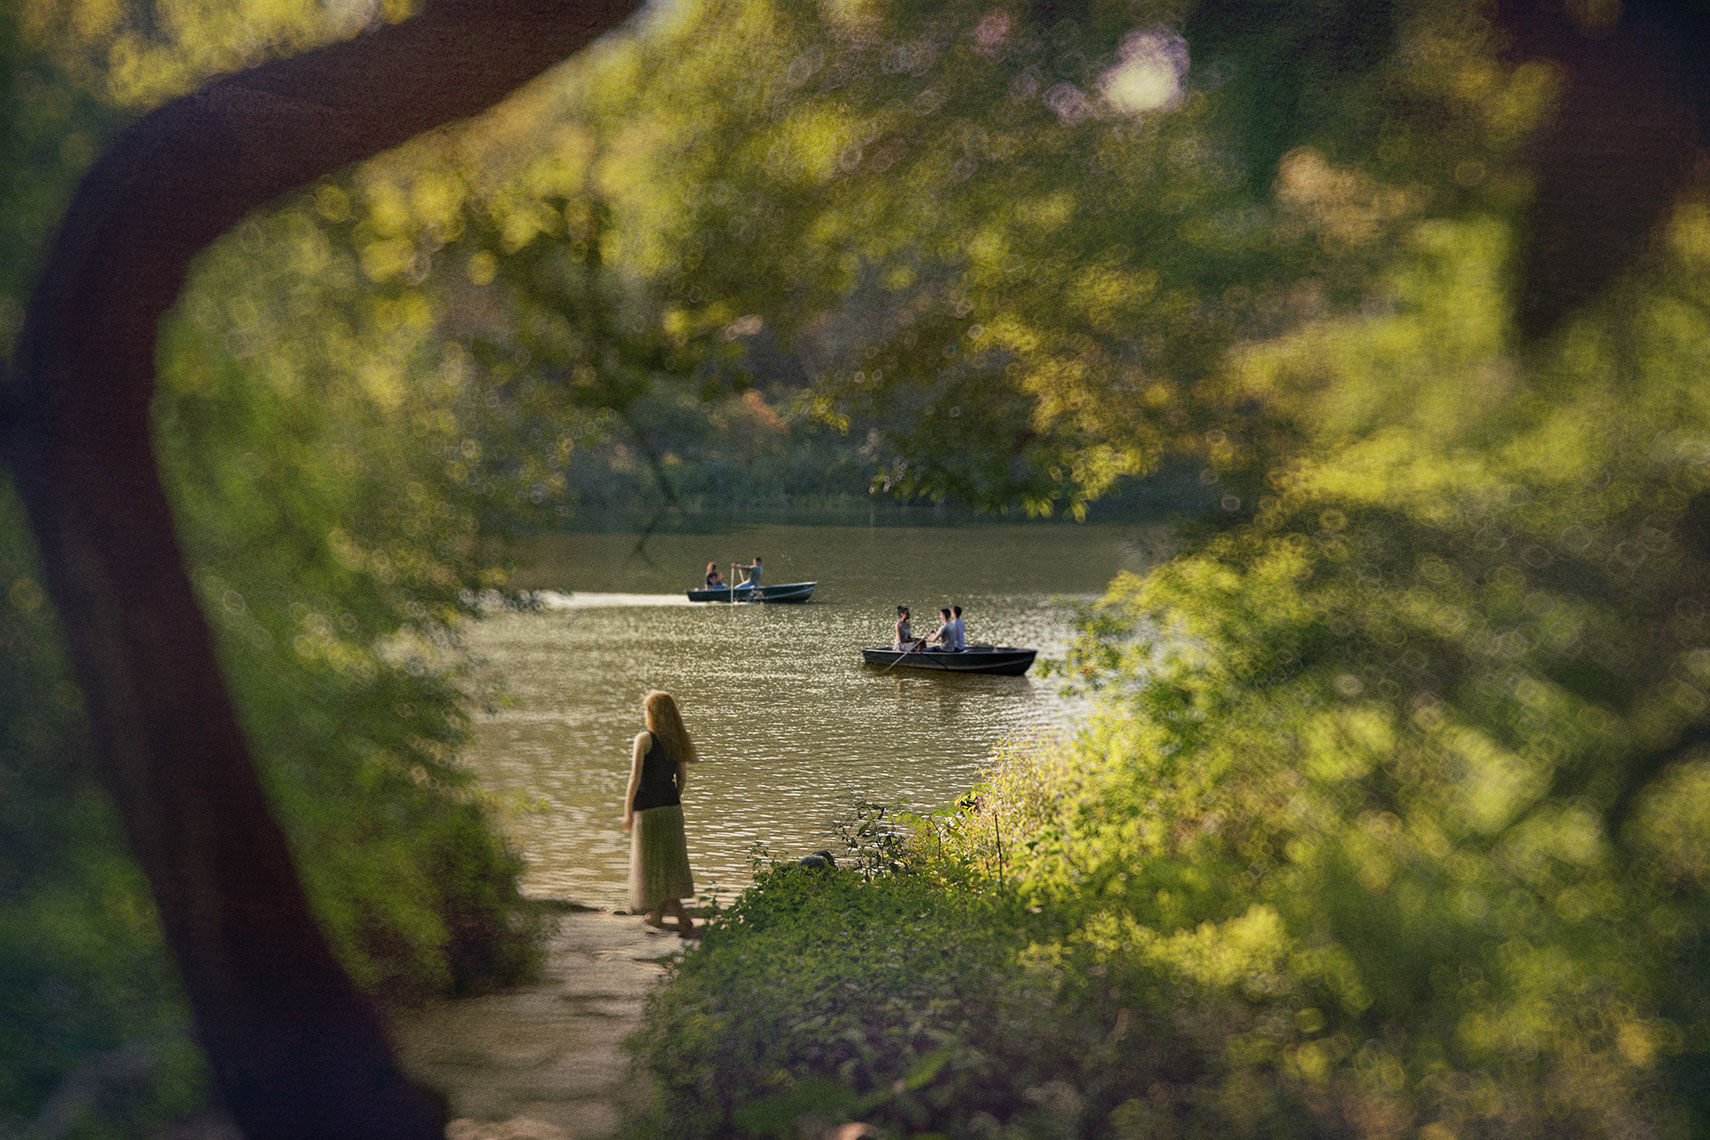 Framed by the lush foliage of soft focus trees, a young woman with long, red hair stands at the edge of a lake, with people enjoying a leisurely day in rowboats in the middle distance.